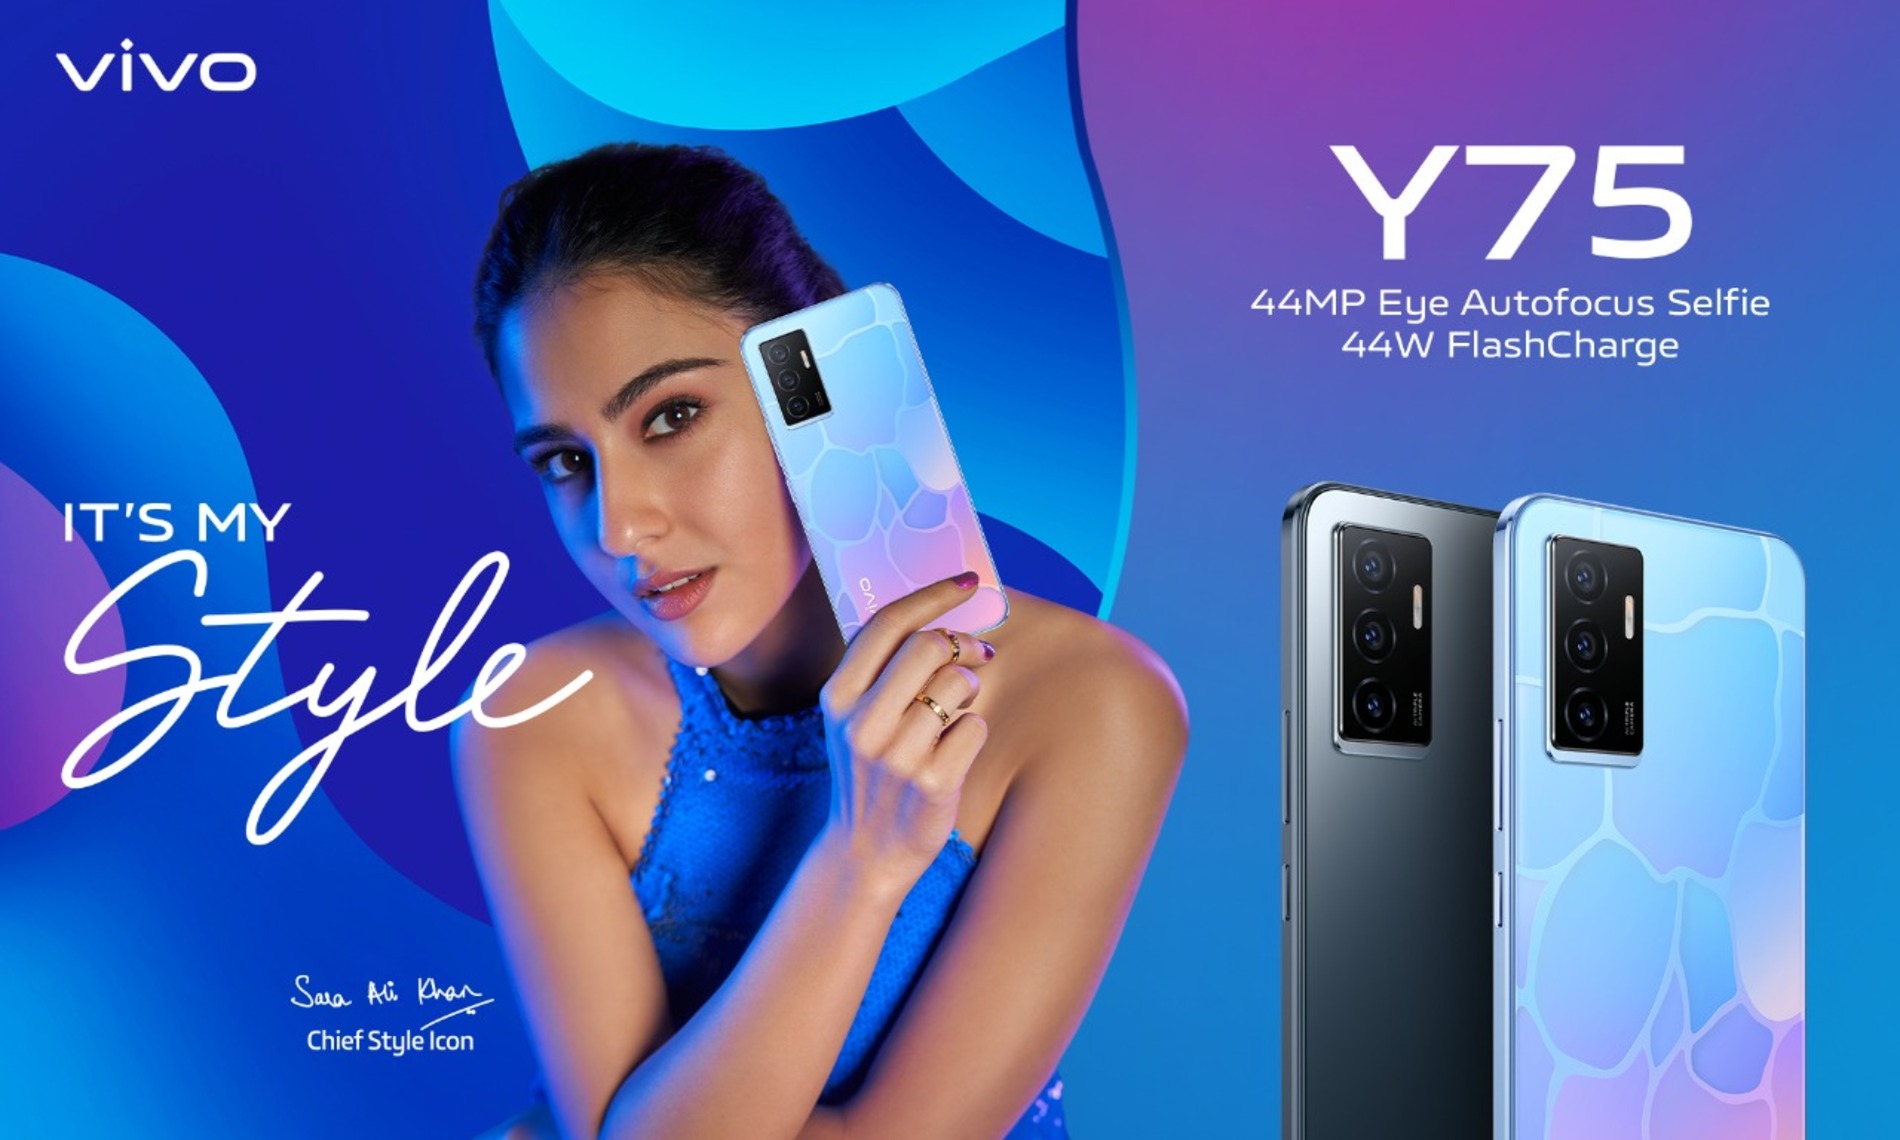 vivo Y75 launched in India with 44MP Eye Autofocus Selfie Camera and 44W FlashCharge